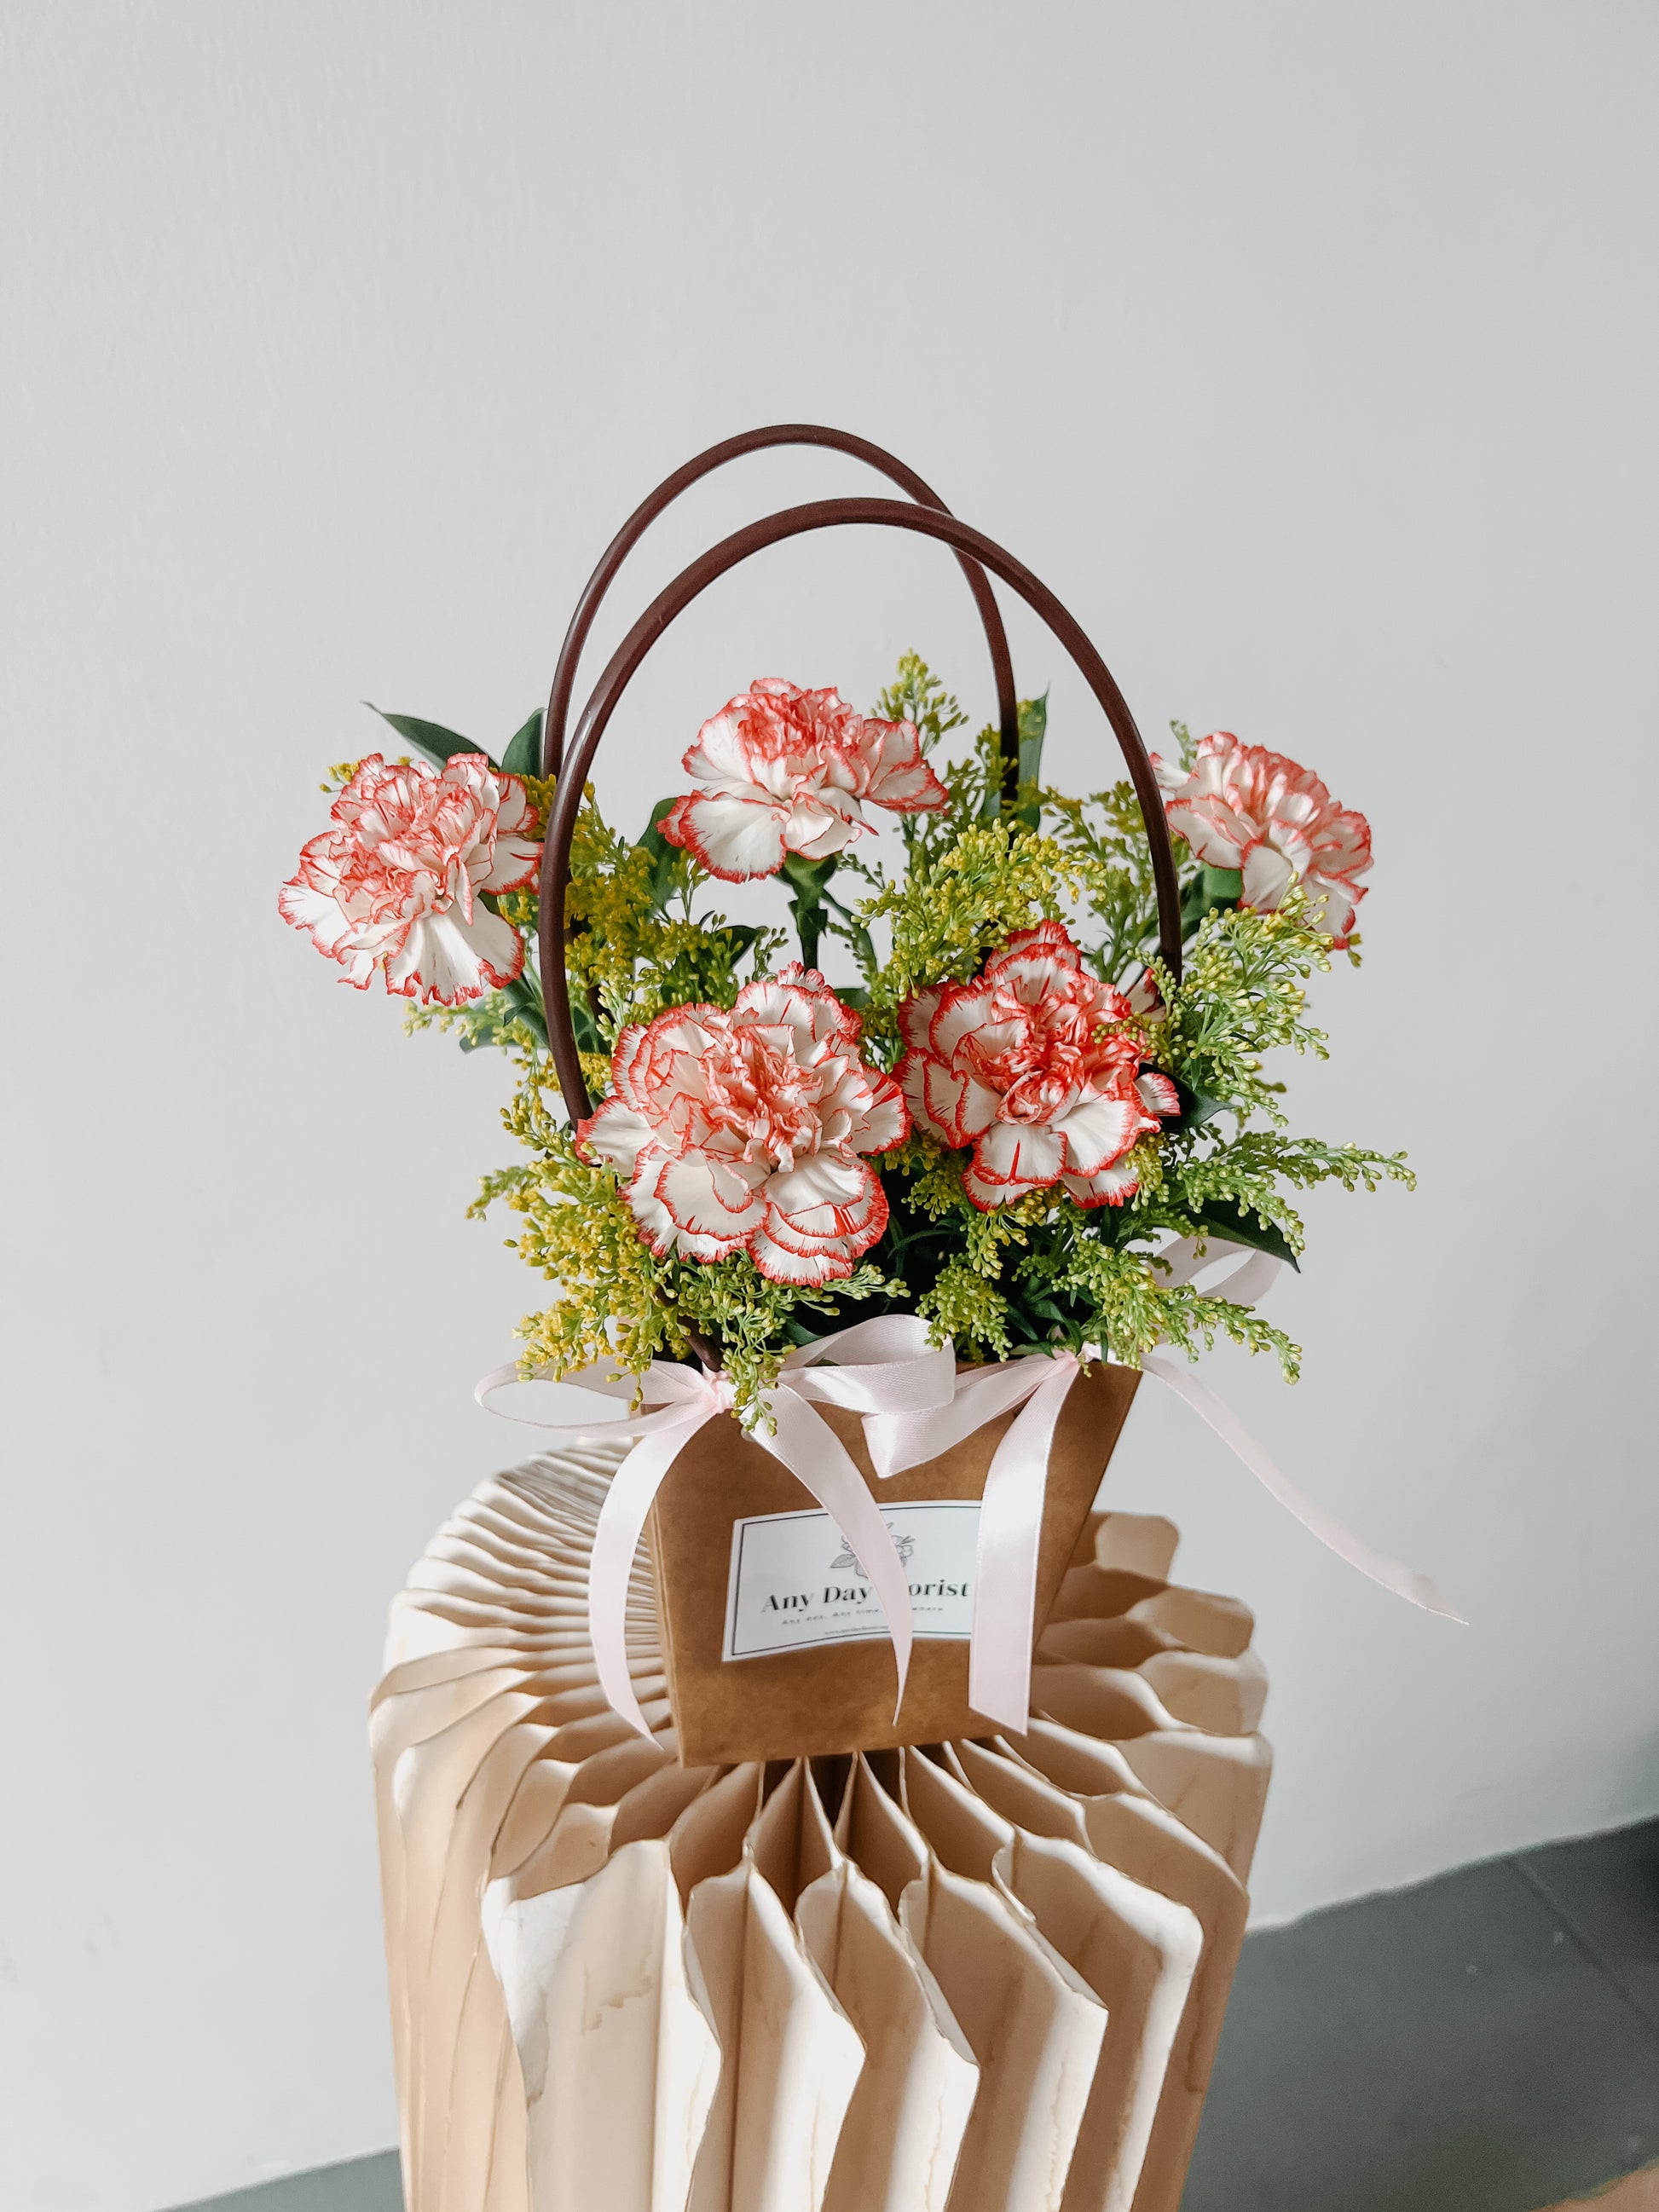 Any Day Florist
Keep your flowers fresh with a Carnation Solidago Bloom Bag!  This unique carnation solid ago bloom bag is perfect for any occasion. It is a great way to show off yCarnation Solidago Bloom Bag